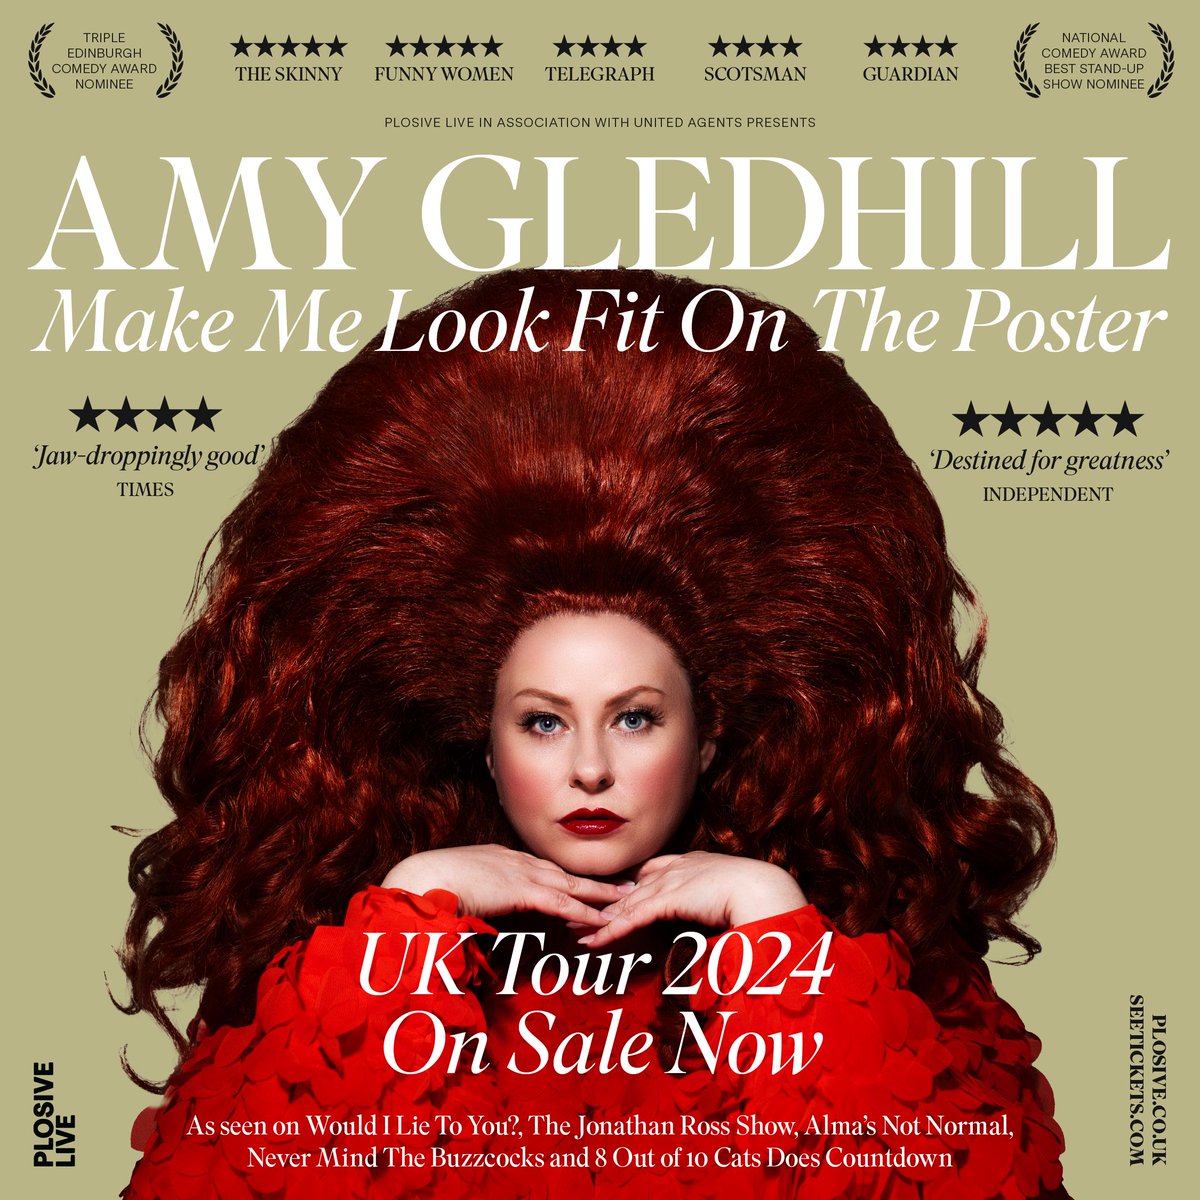 📣 ON SALE NOW 📣 Amy Gledhill: Make Me look Fit On The Poster The triple Edinburgh Comedy Award nominee returns with a brand-new show about self-confidence, romance and bin bags. 📅 29 November 🎟️ lsqtheatre.com/3wlm9Cb